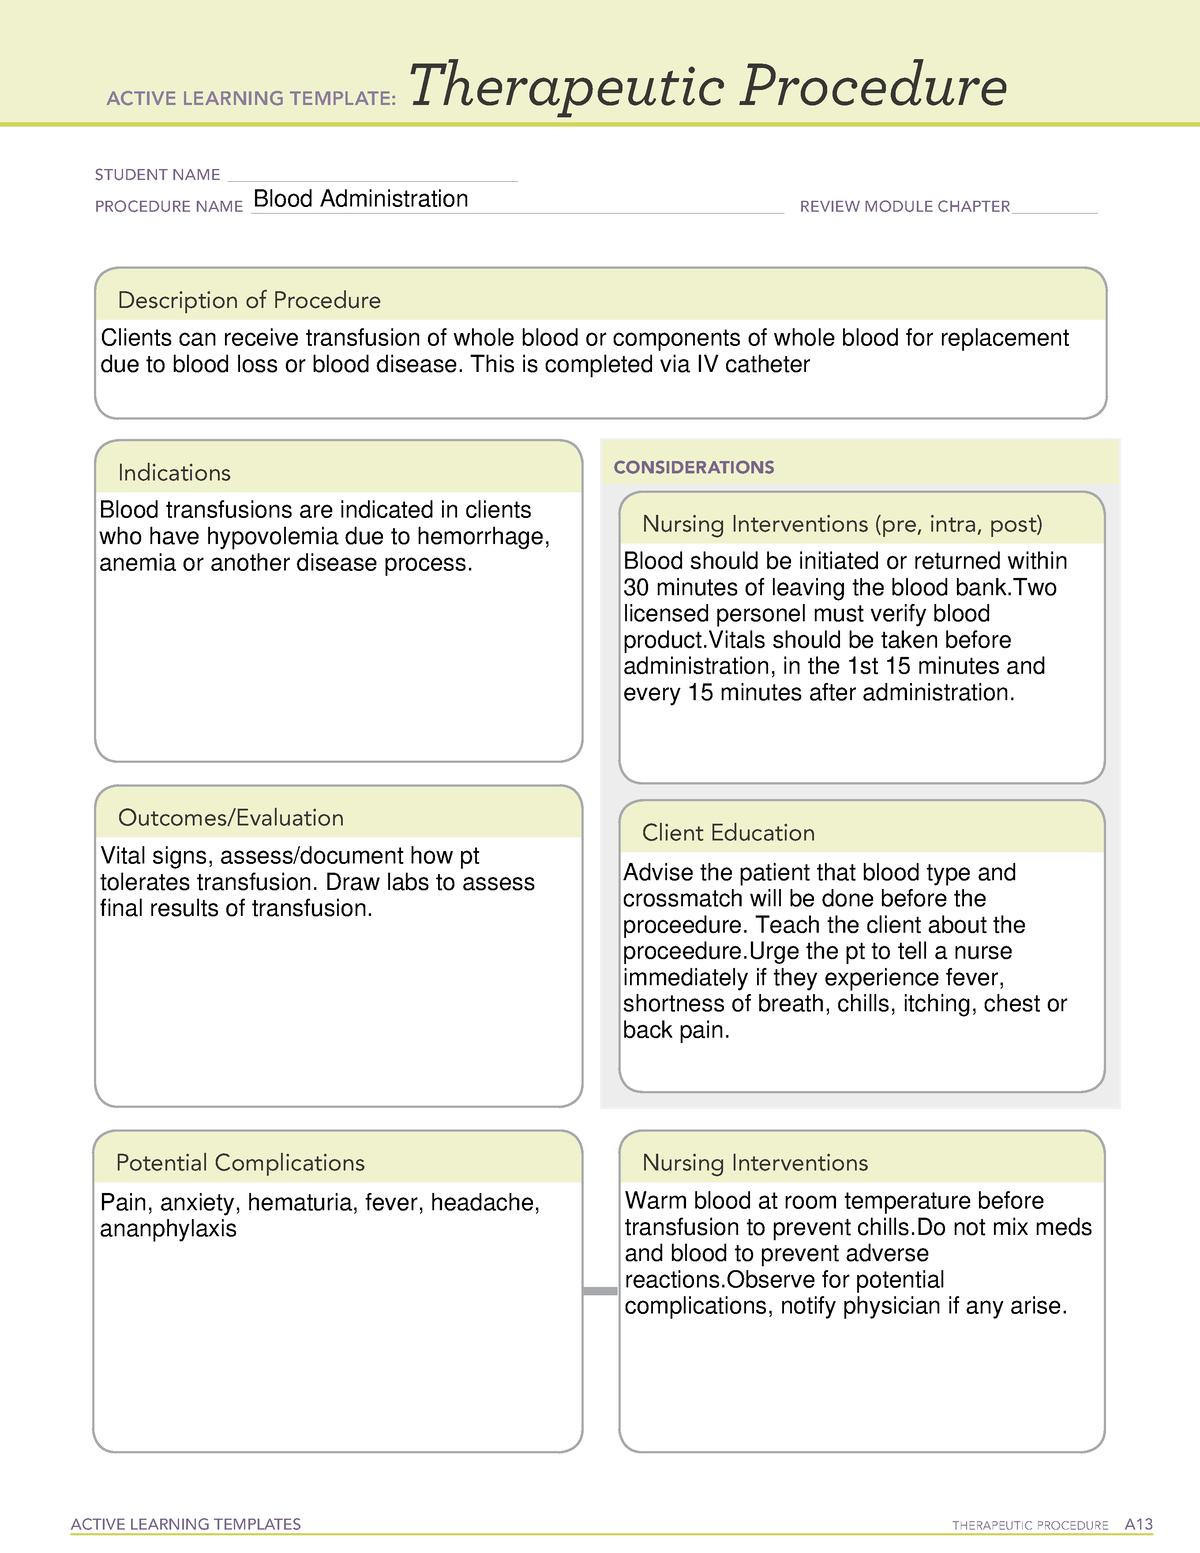 active-learning-template-therapeutic-procedure-form-active-learning